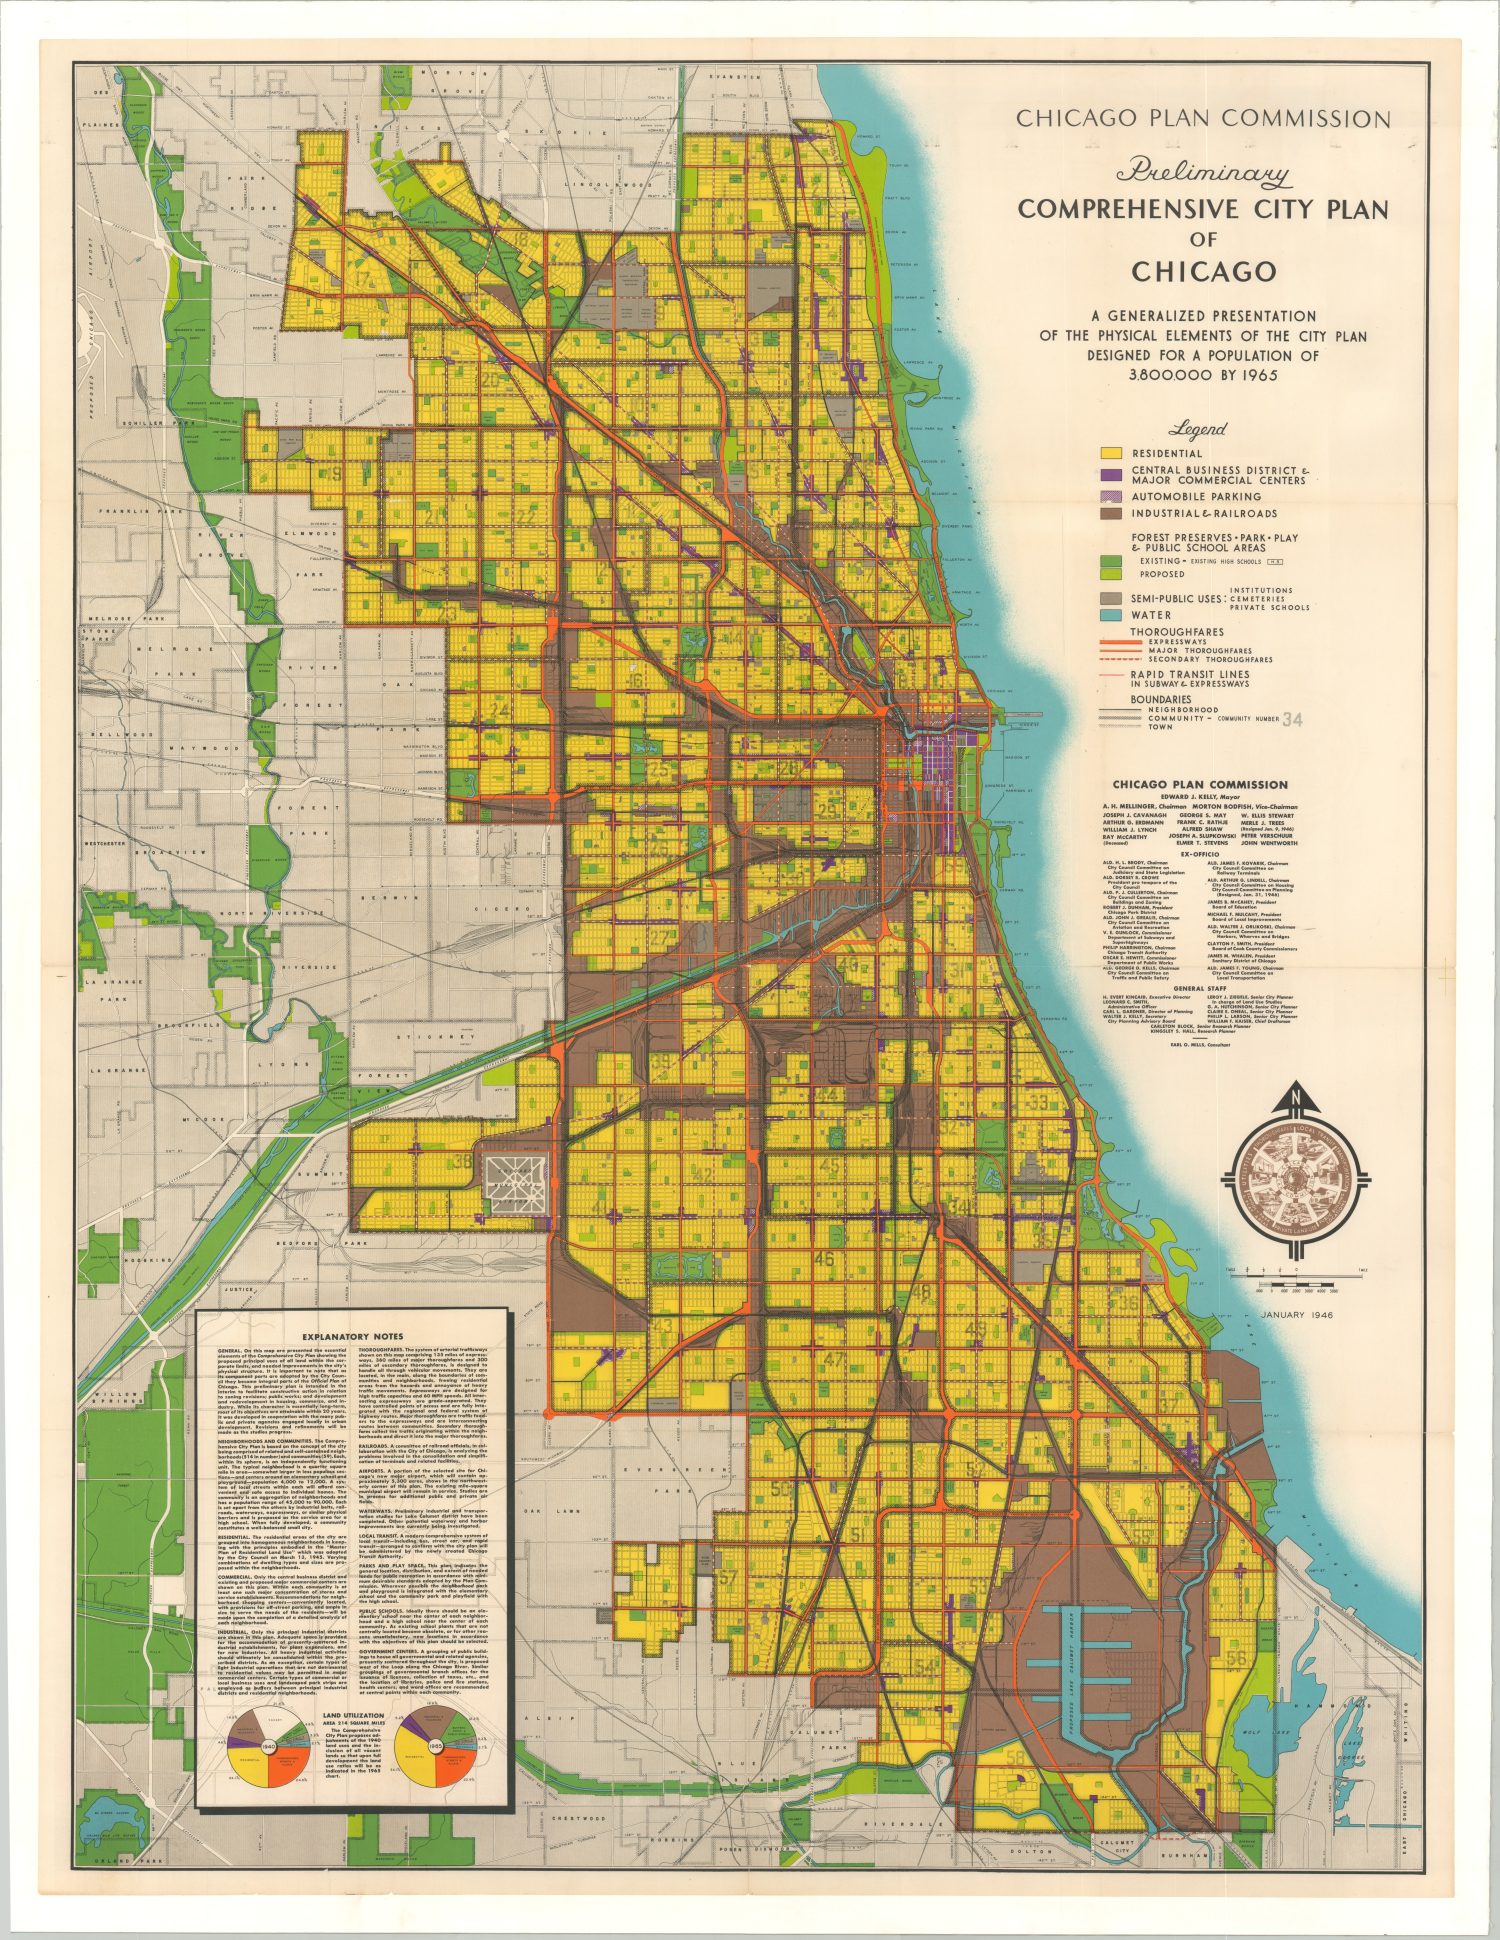 Preliminary Comprehensive City Plan of Chicago | Curtis Wright Maps